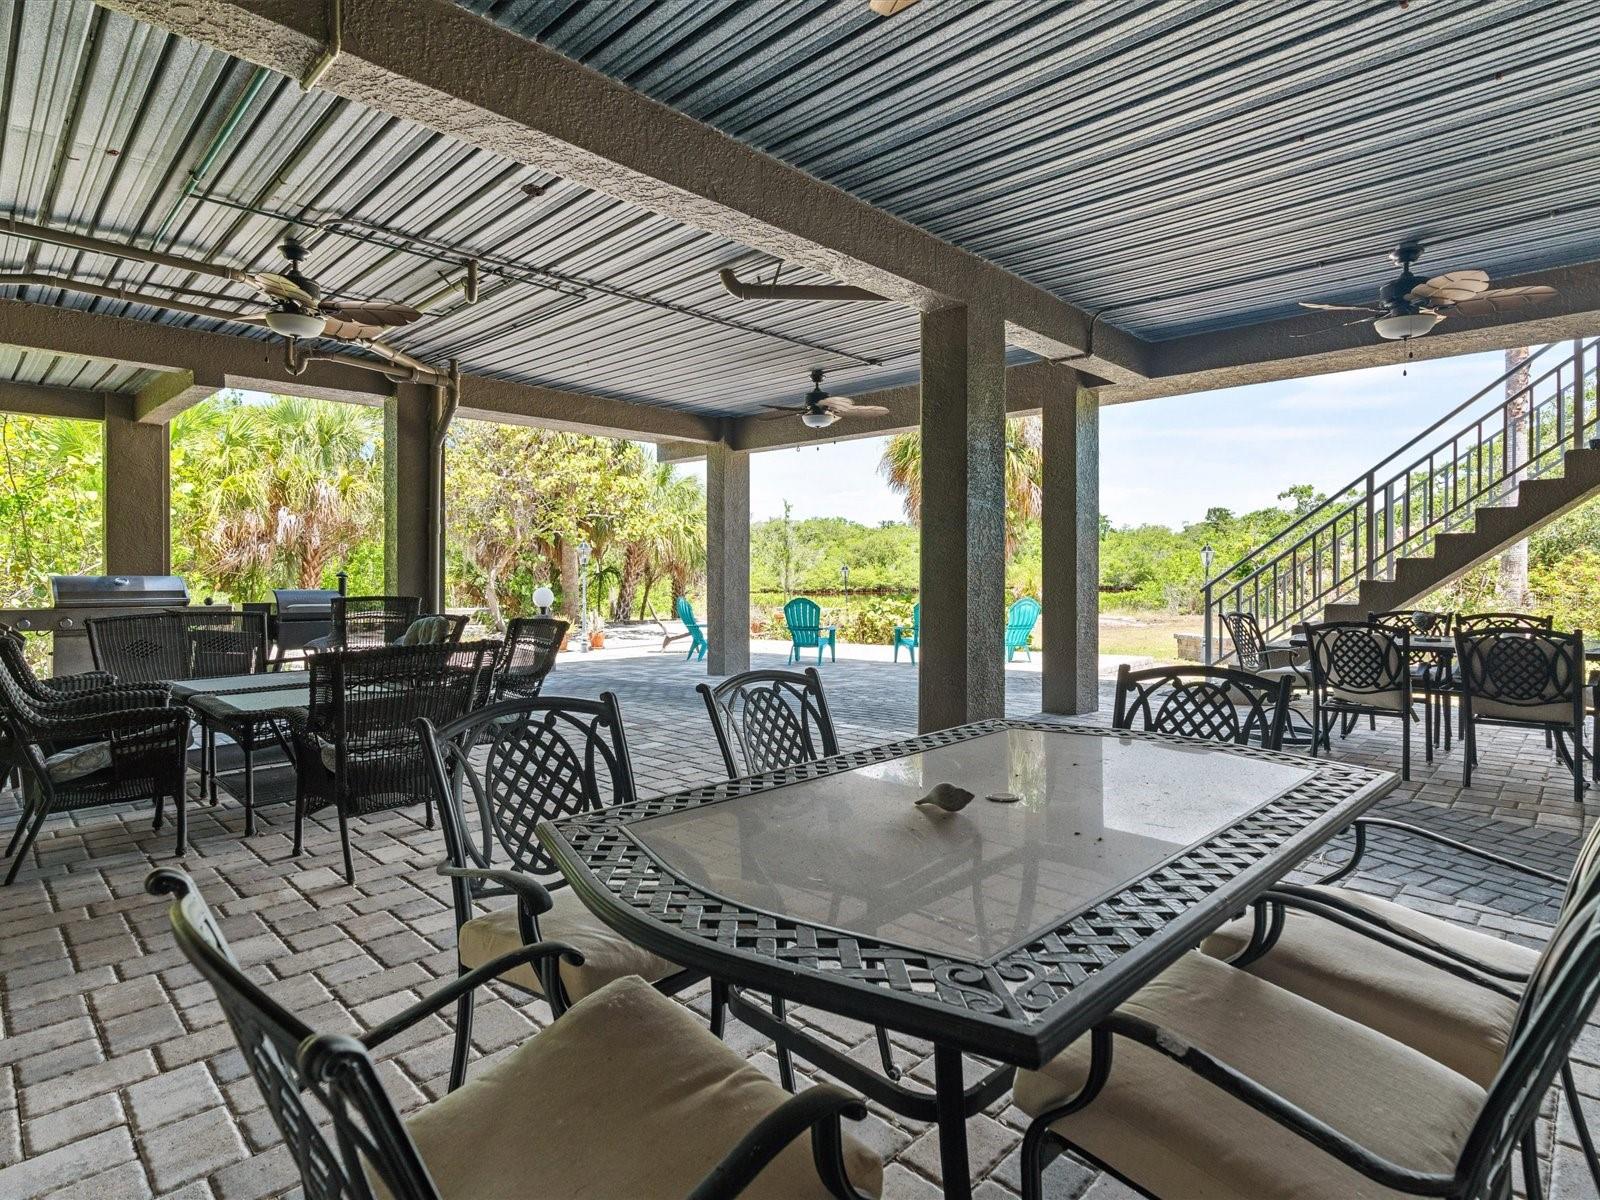 Expansive outdoor covered dining/entertaining area.